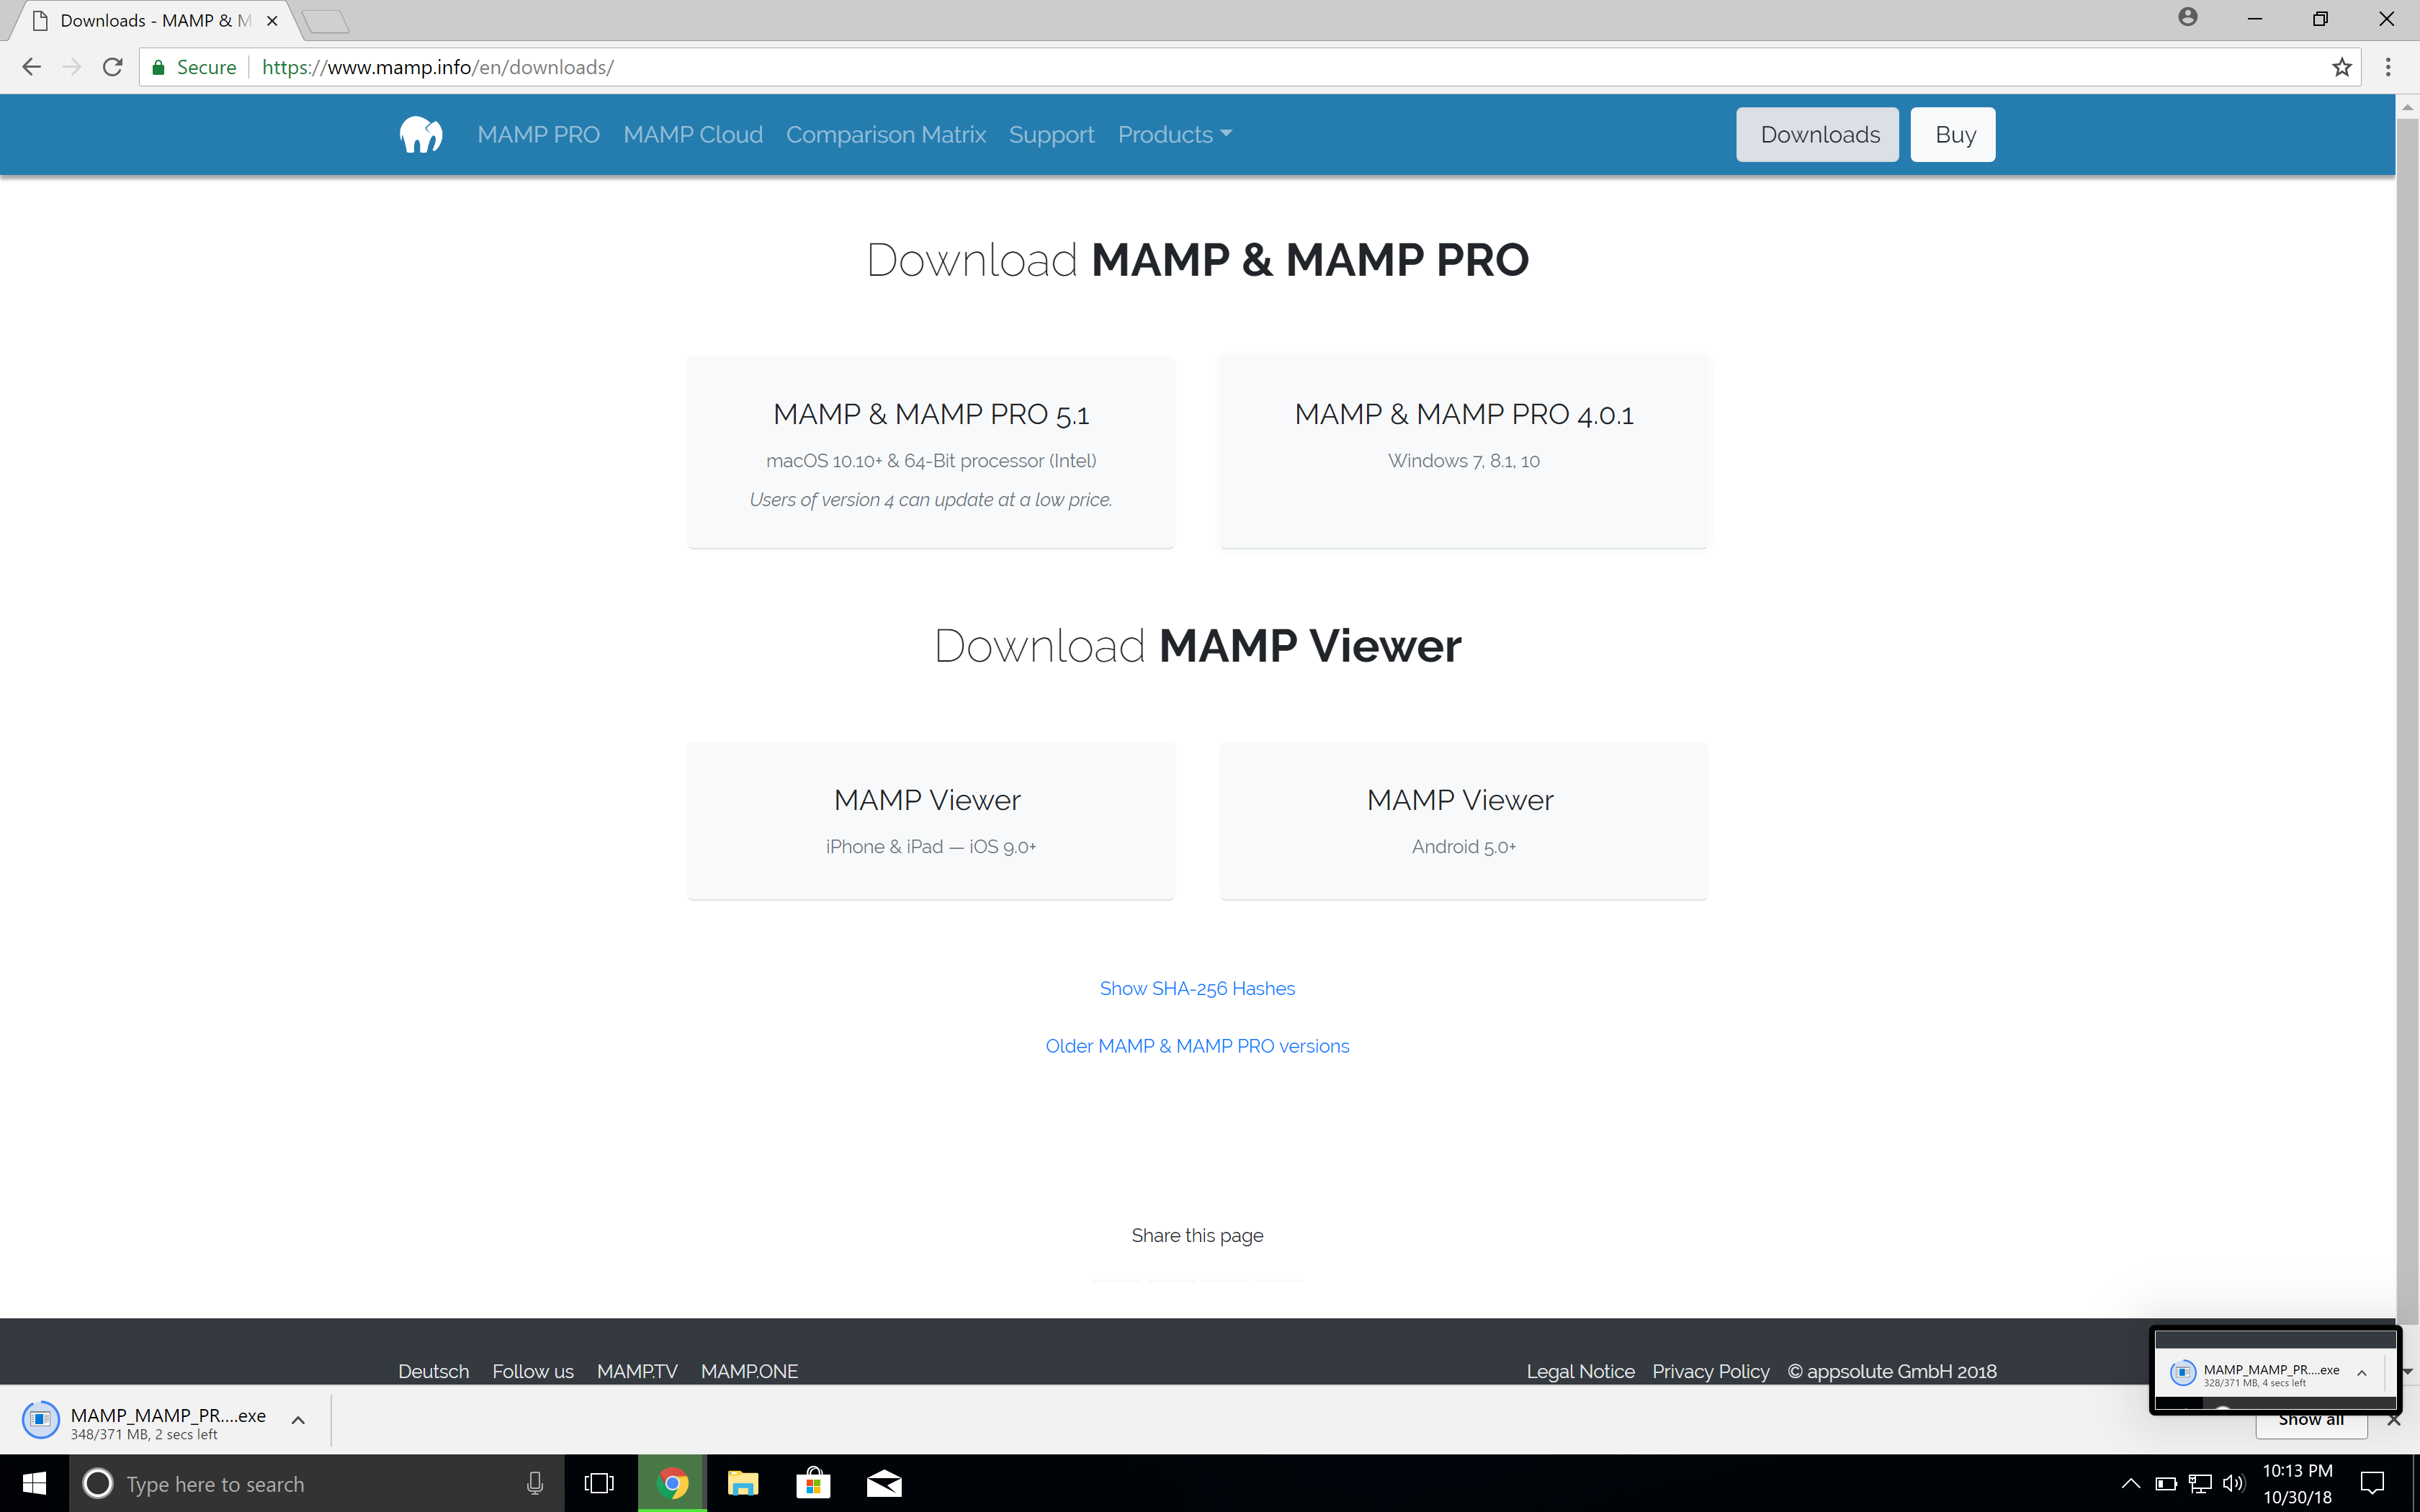 mamp install php intl extension